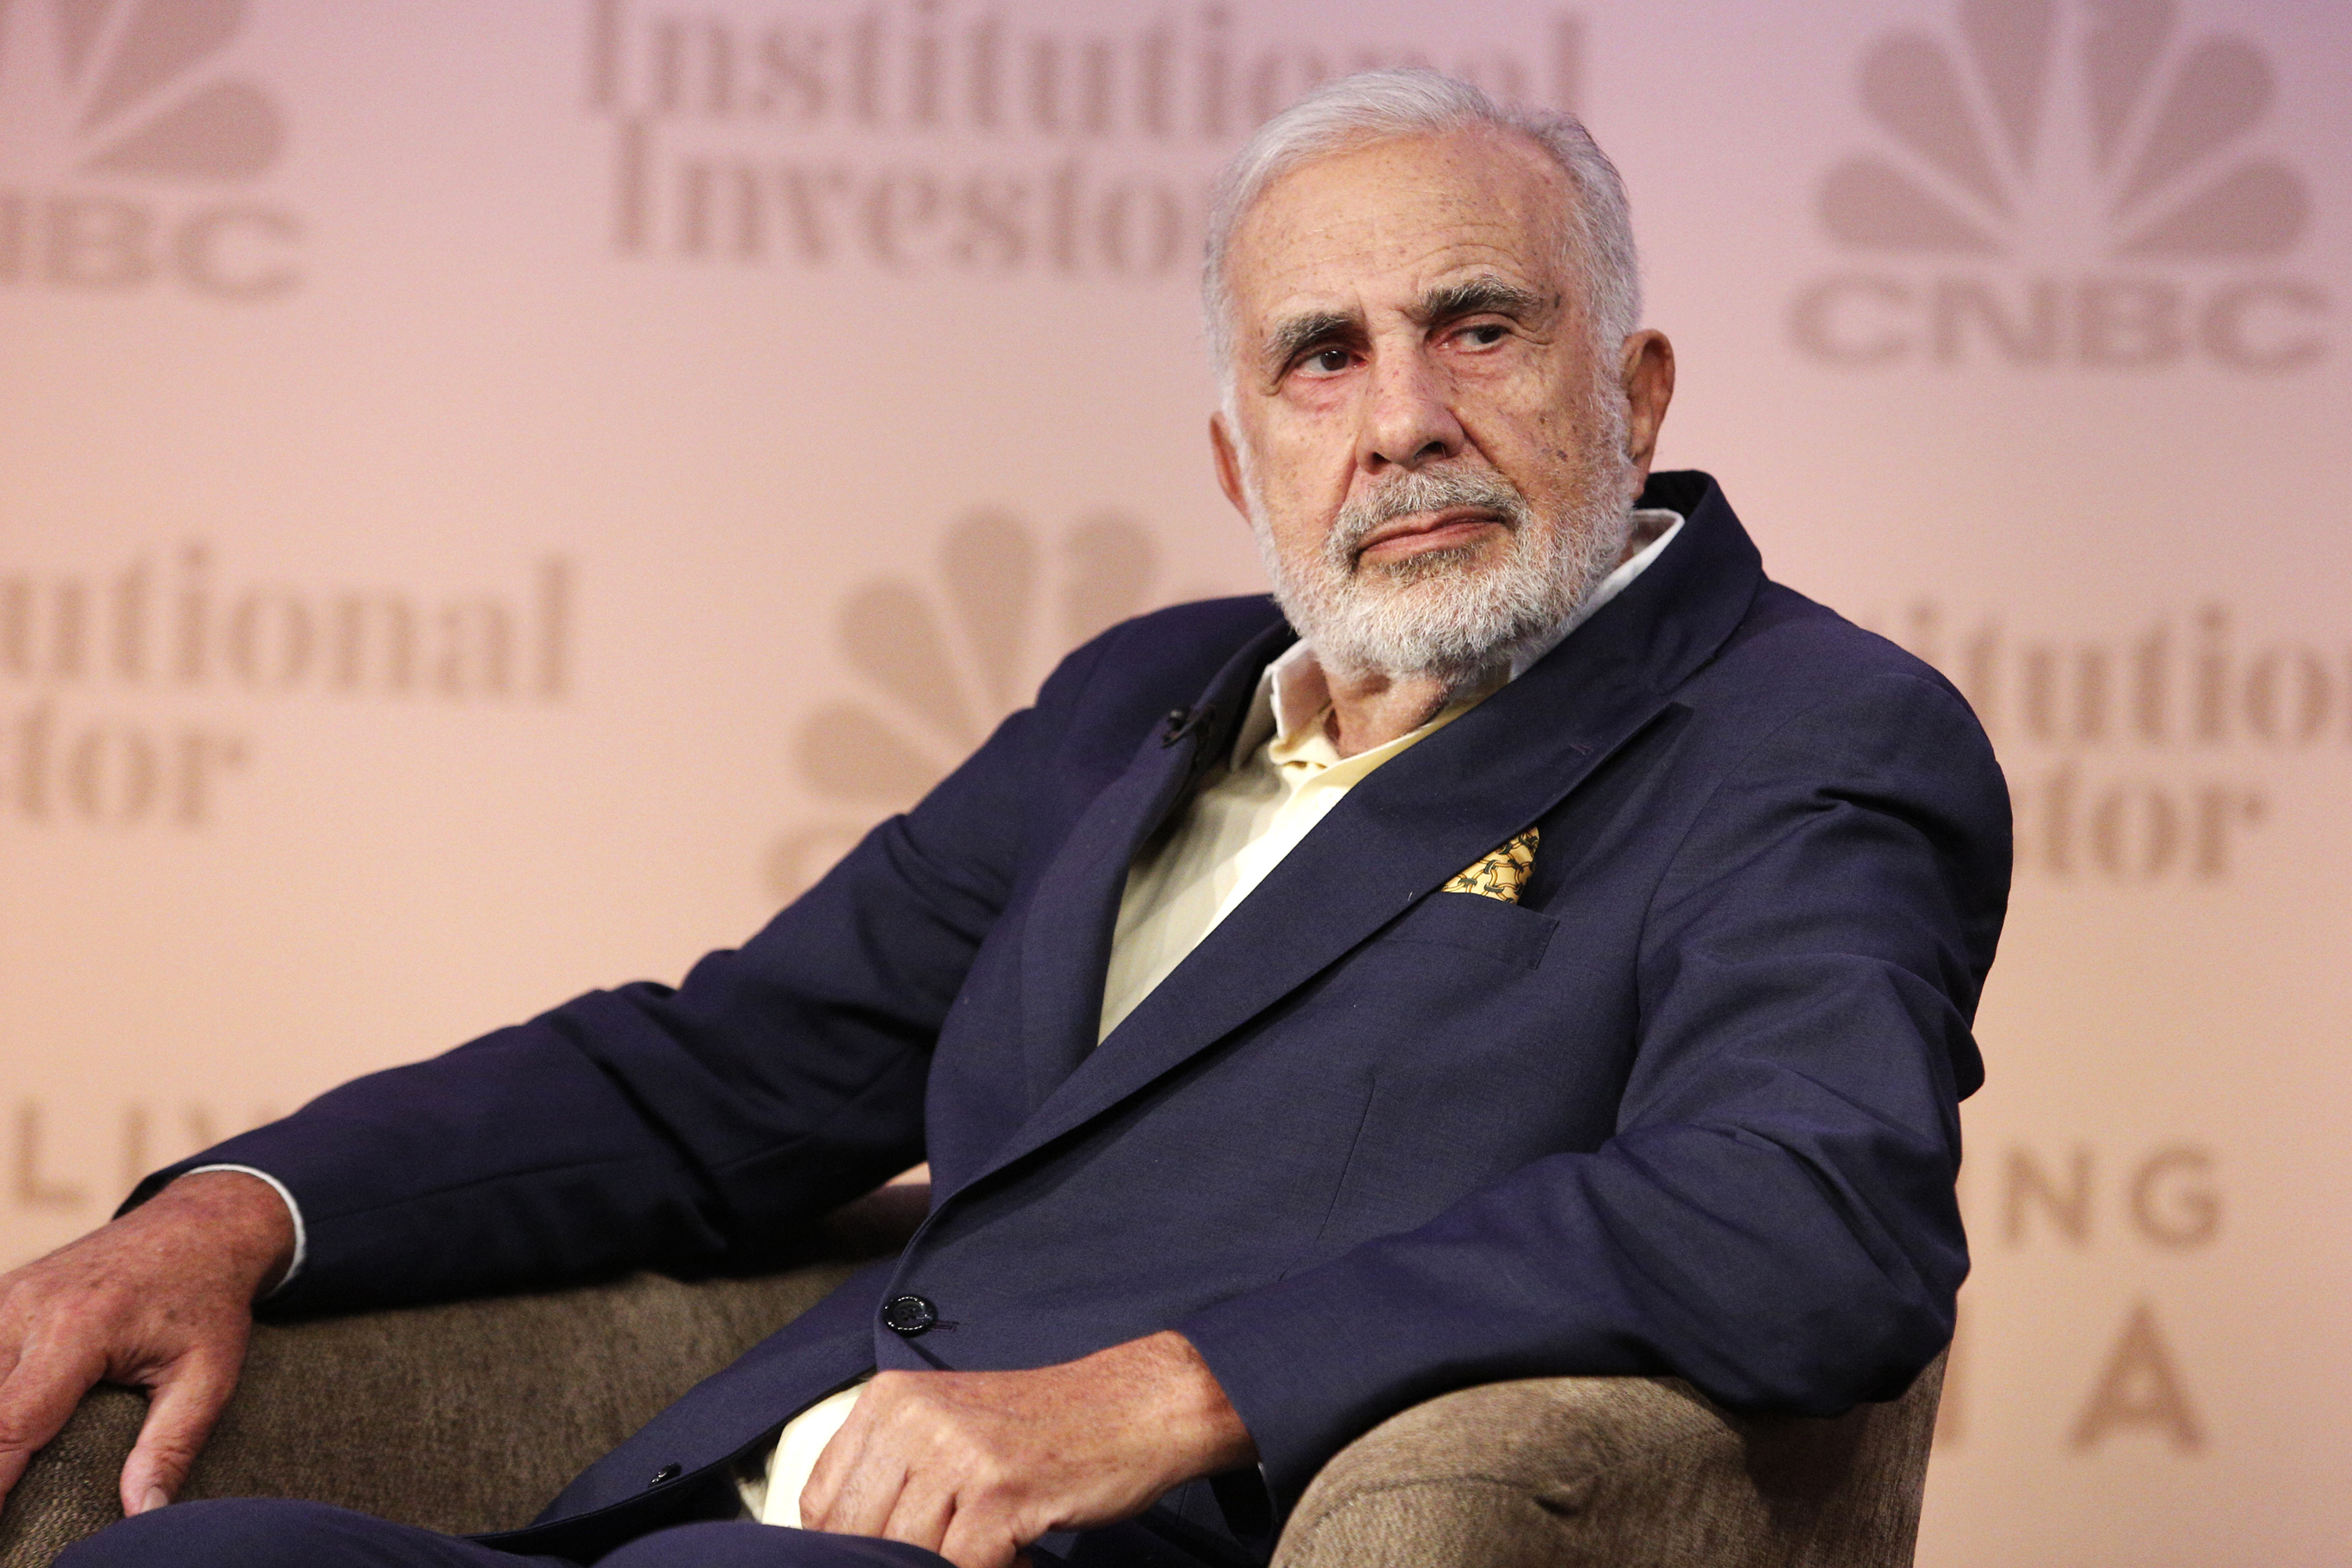 CNBC's Scott Wapner interviews Carl Icahn, Chairman, Icahn Enterprises at the CNBC Institutional Investor Delivering Alpha Conference in New York. (CNBC—NBCU Photo Bank via Getty Images)